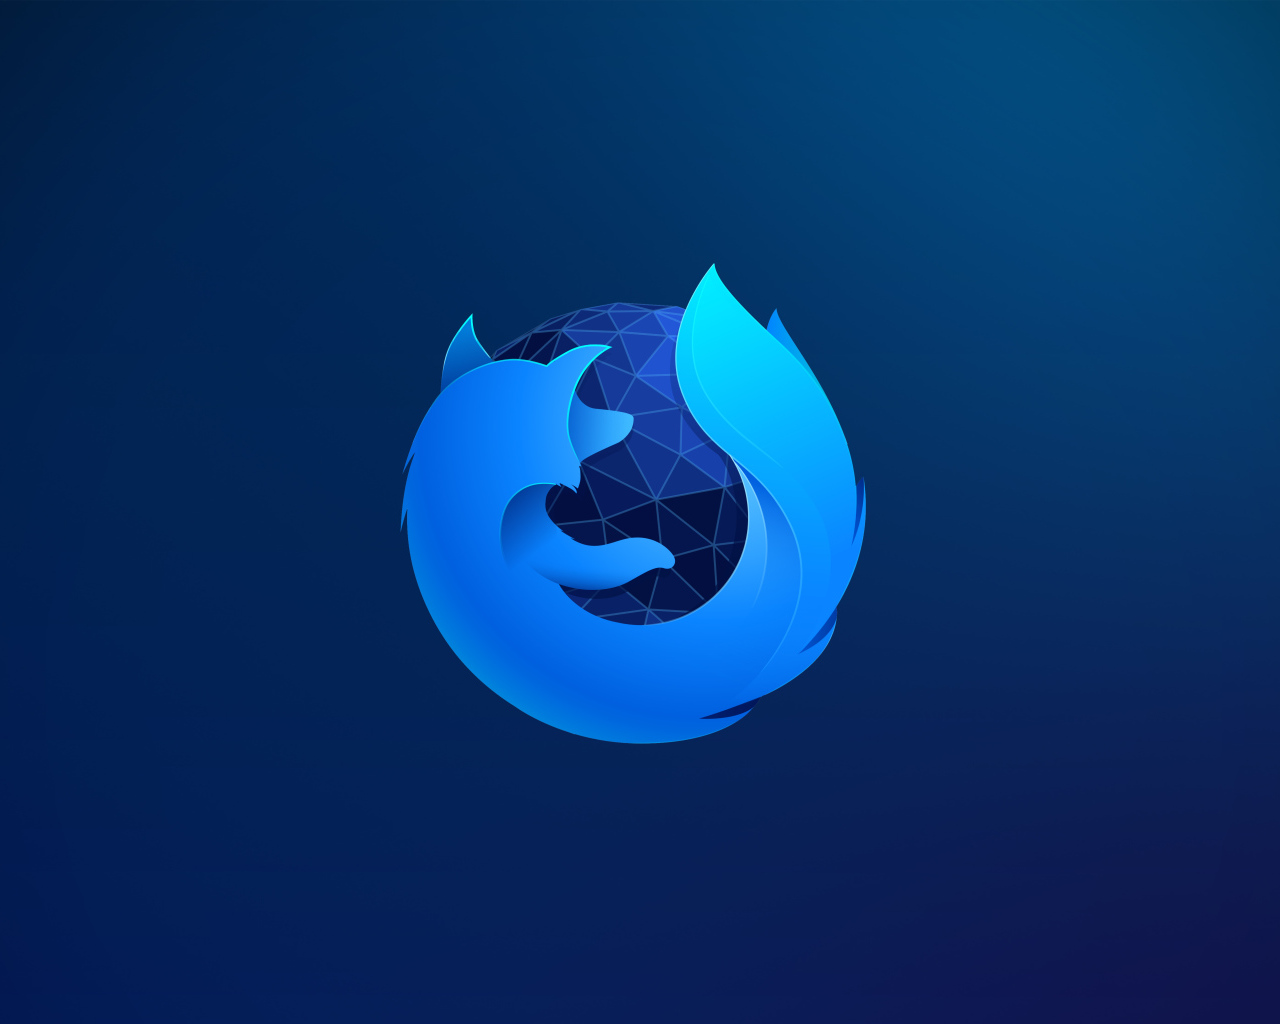 Firefox browser logo on blue background